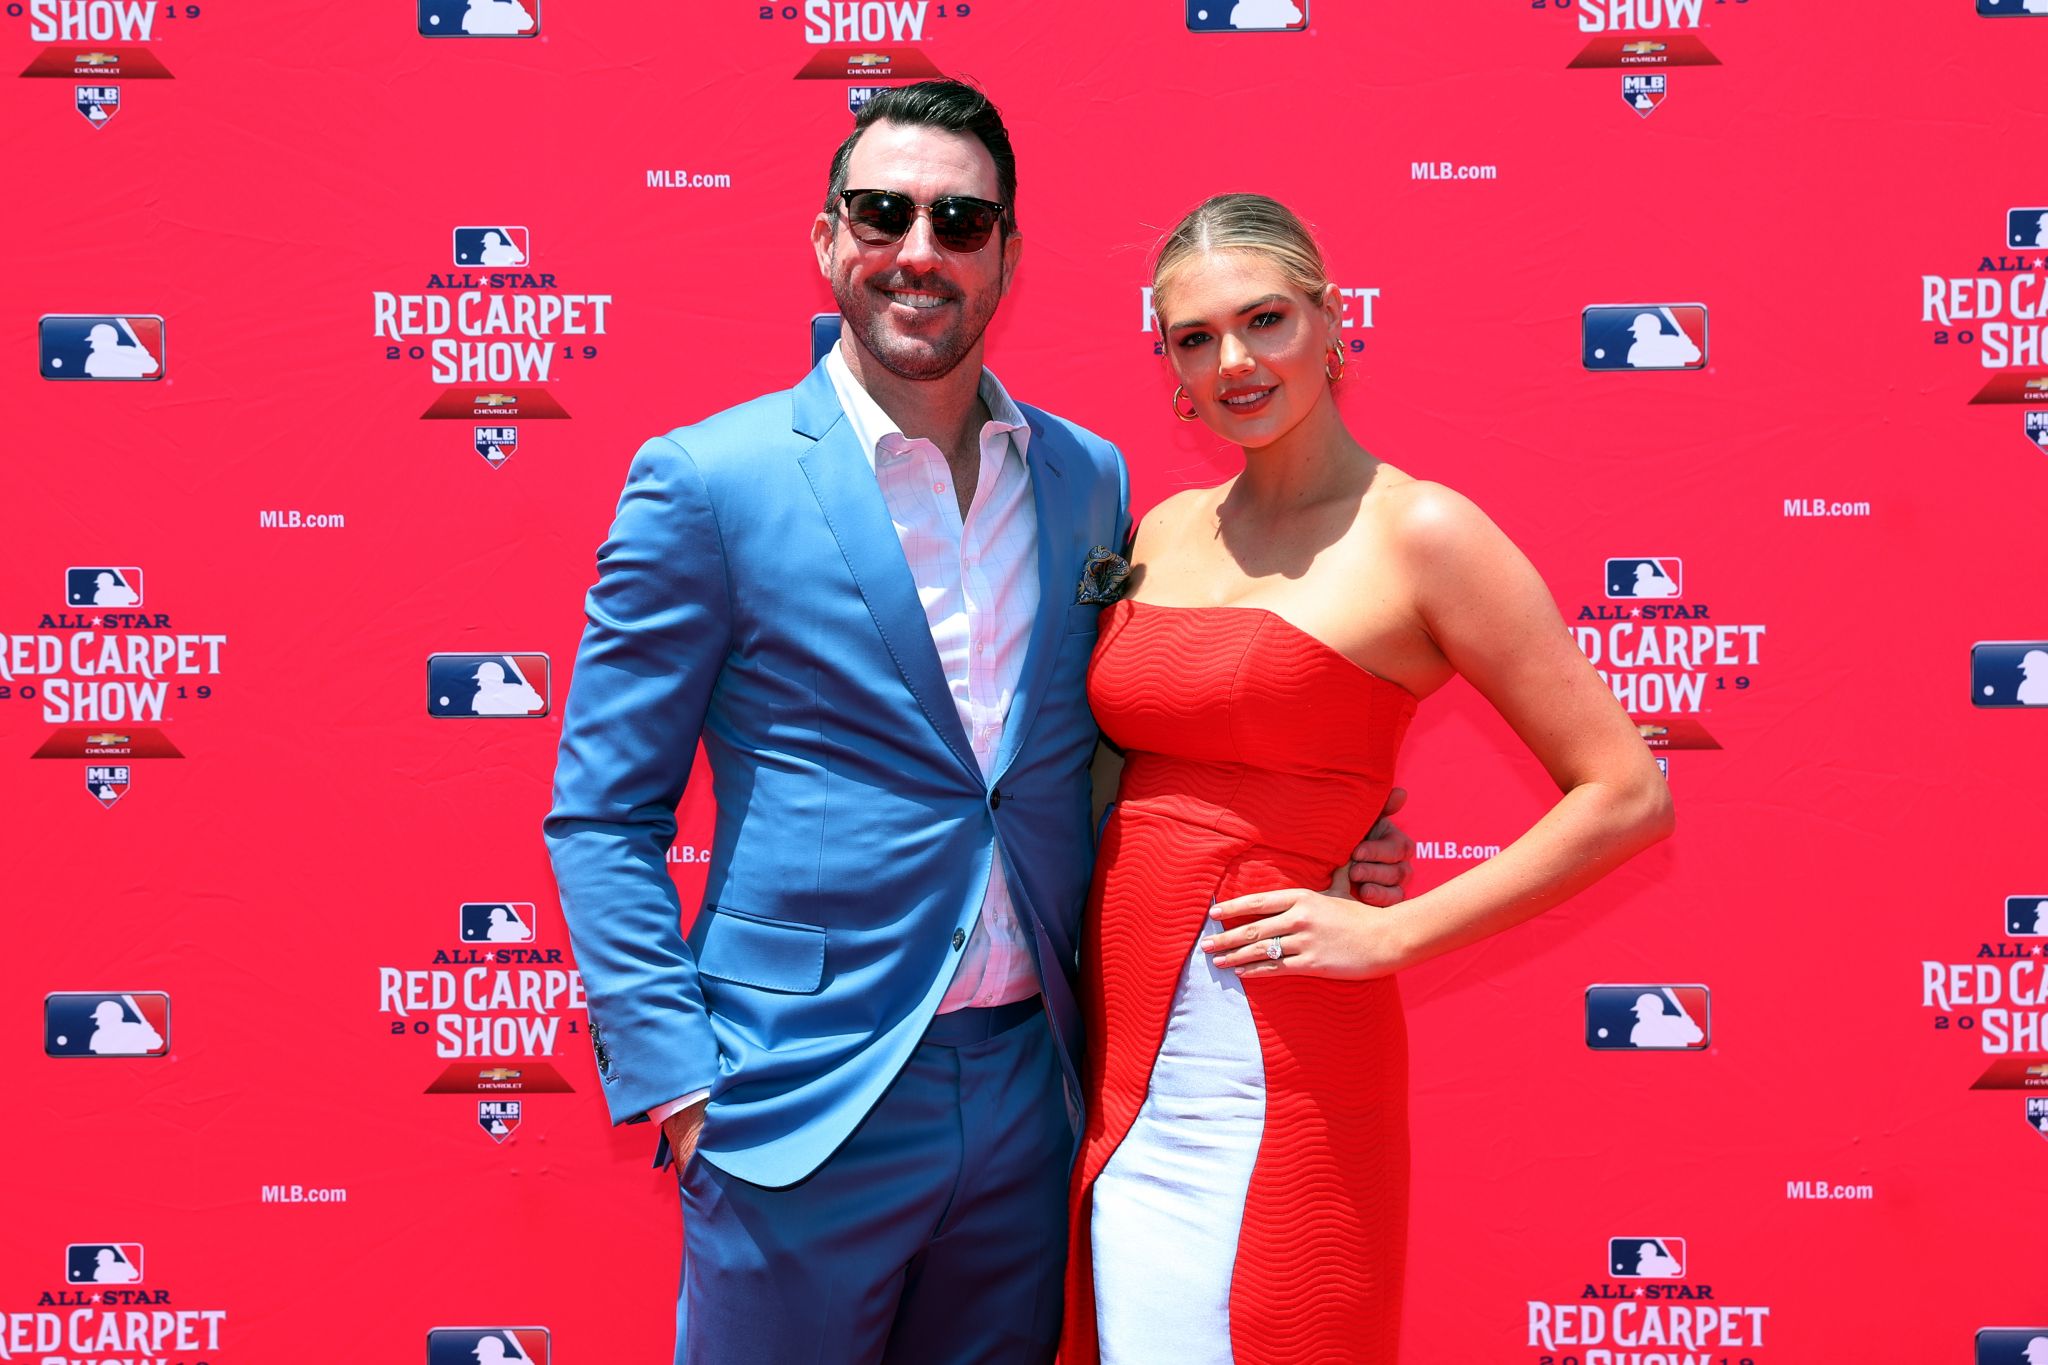 Astros rock the red carpet ahead of 2019 MLB All-Star Game